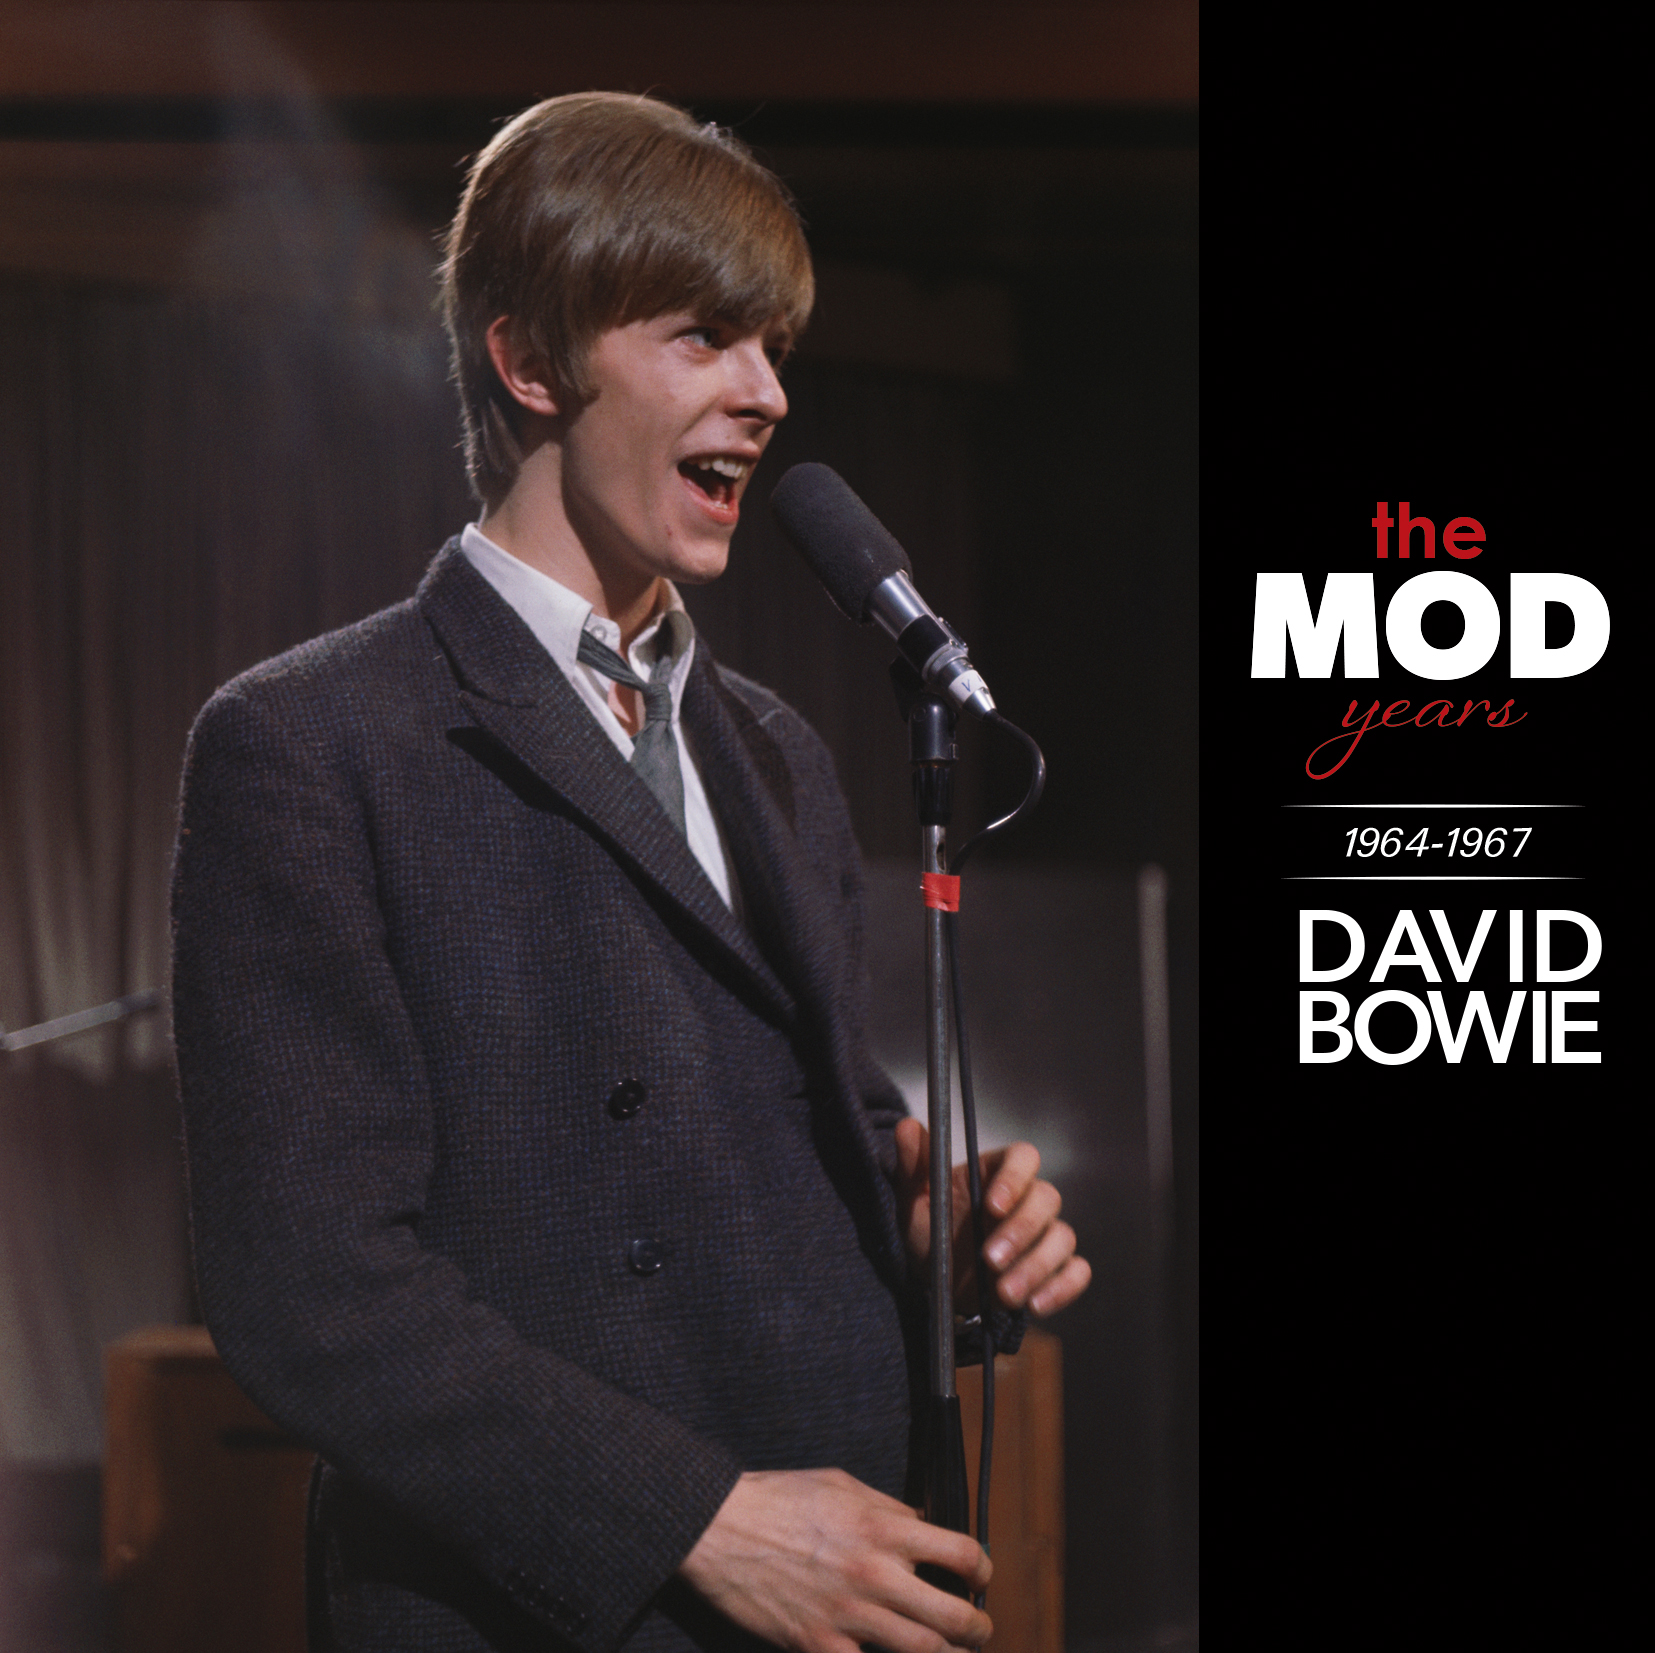 DAVID BOWIE / THE MOD YEARS 1964-1967